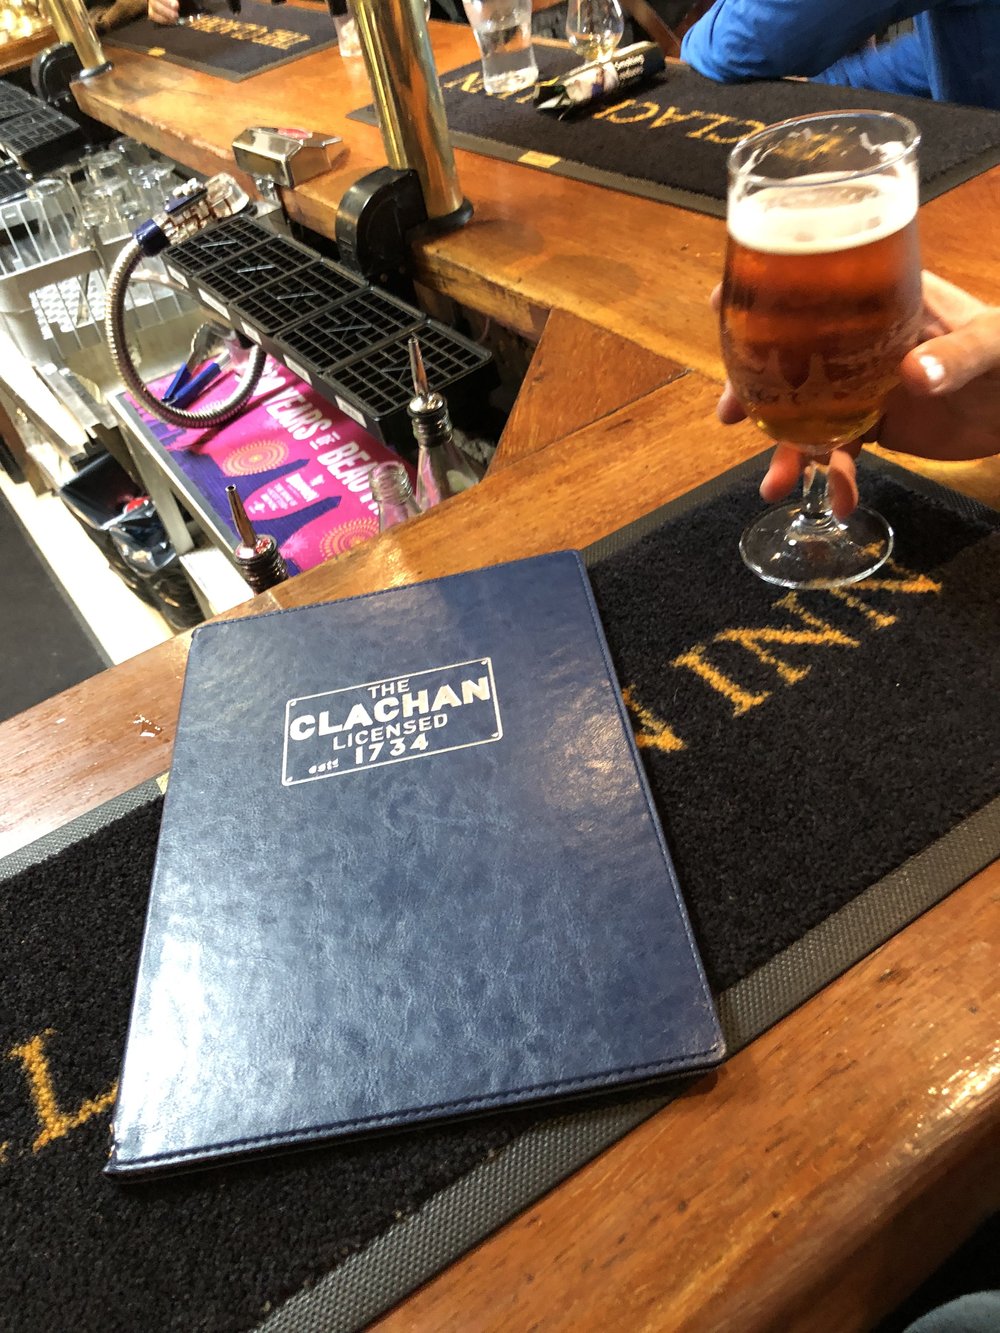 The Clachan for a pint and chips